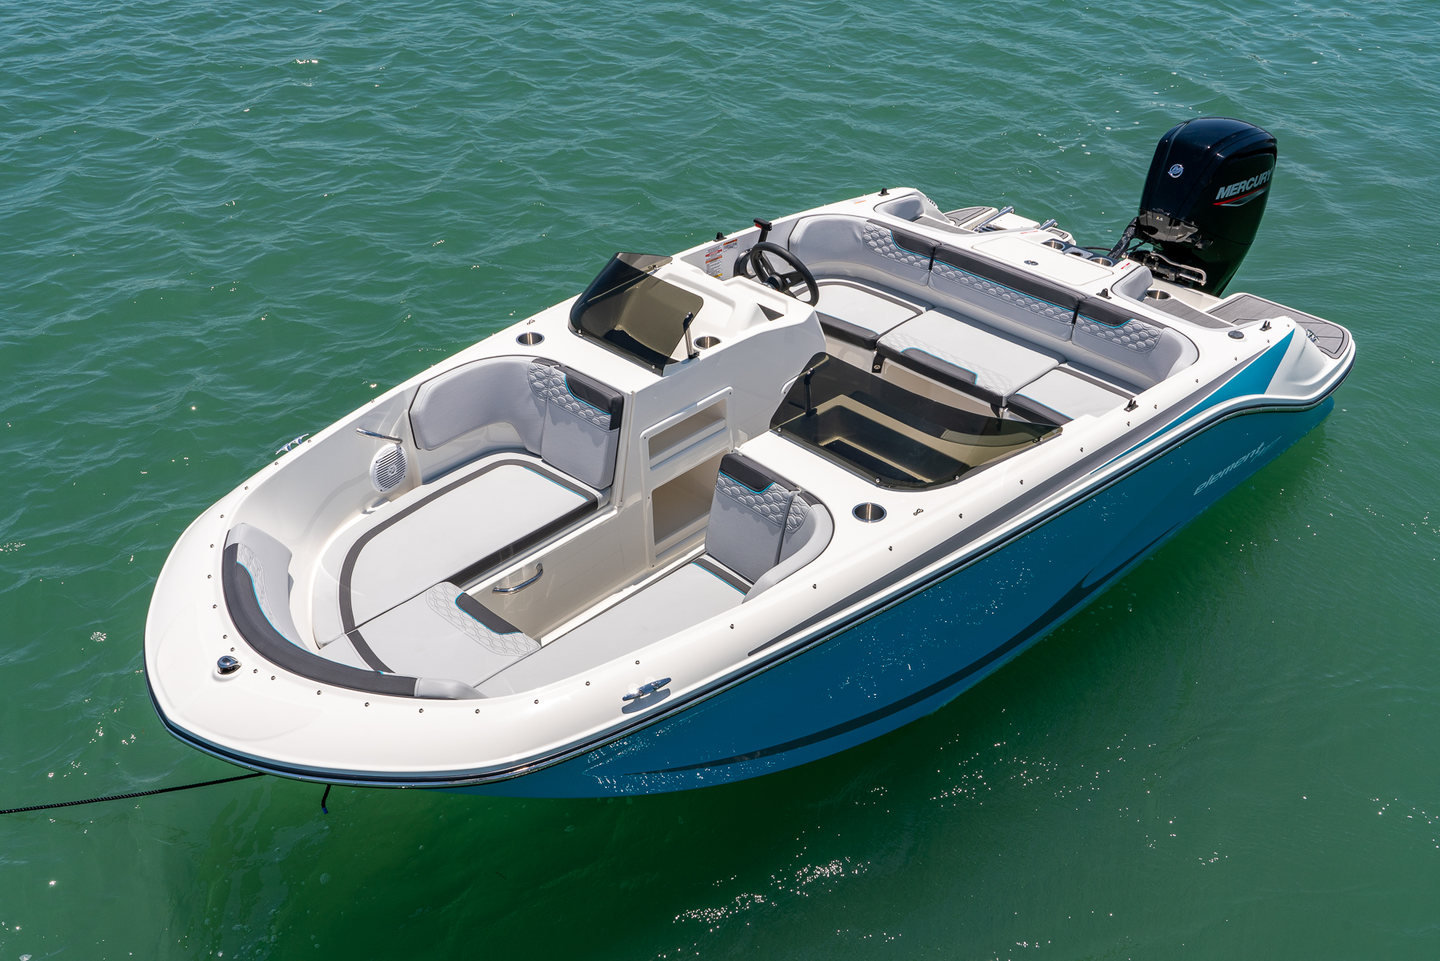 360 VR Virtual Tours of the Bayliner Element M17